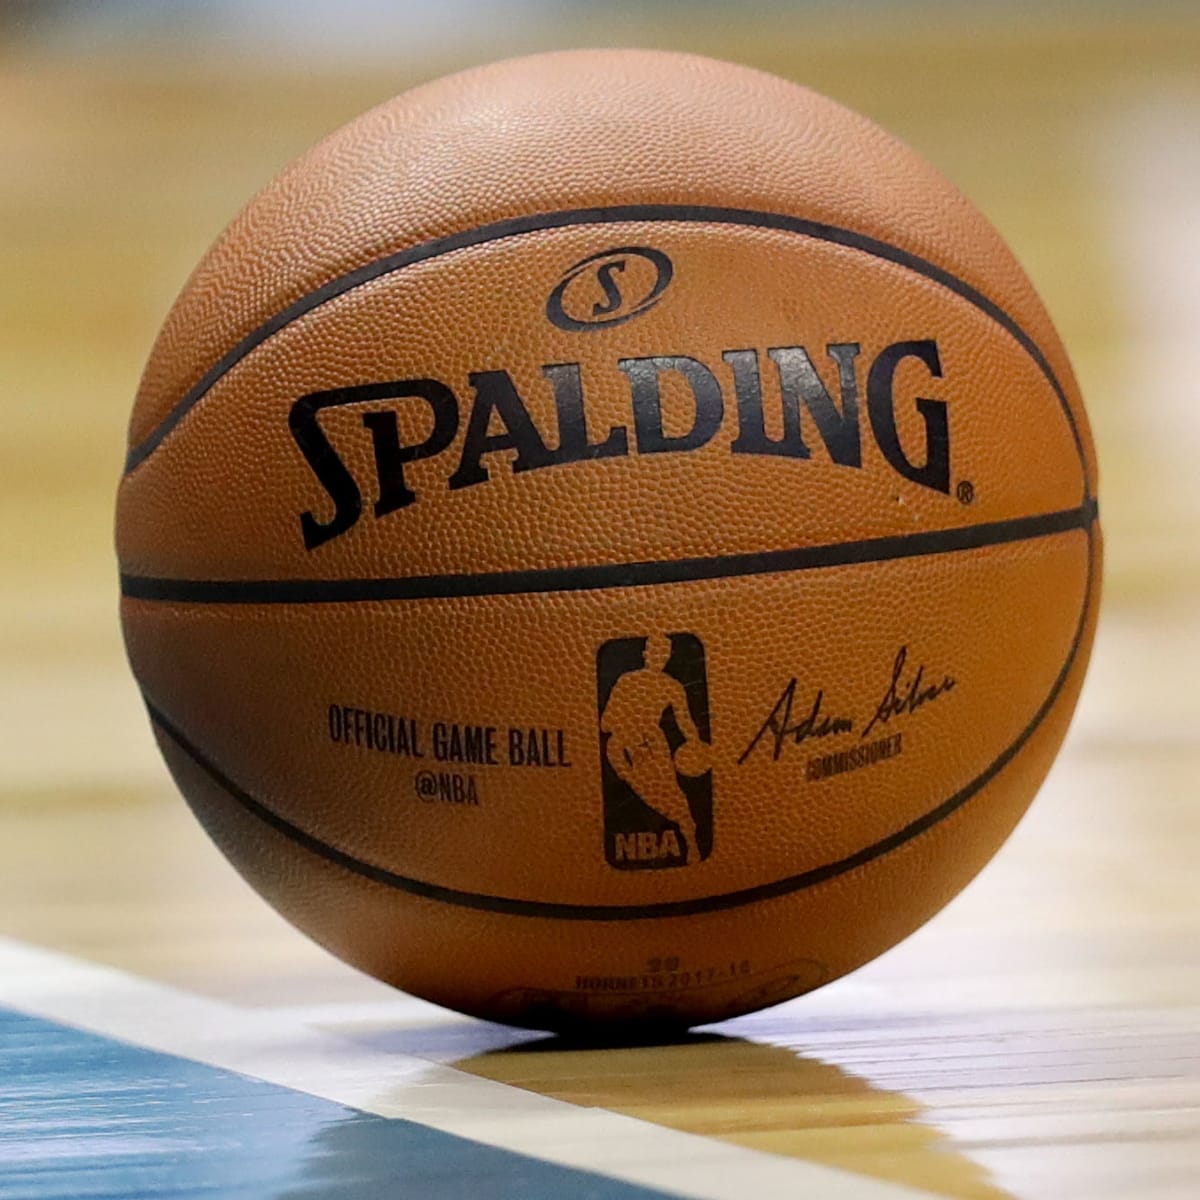 NBA is switching official game ball to Wilson brand - Los Angeles Times